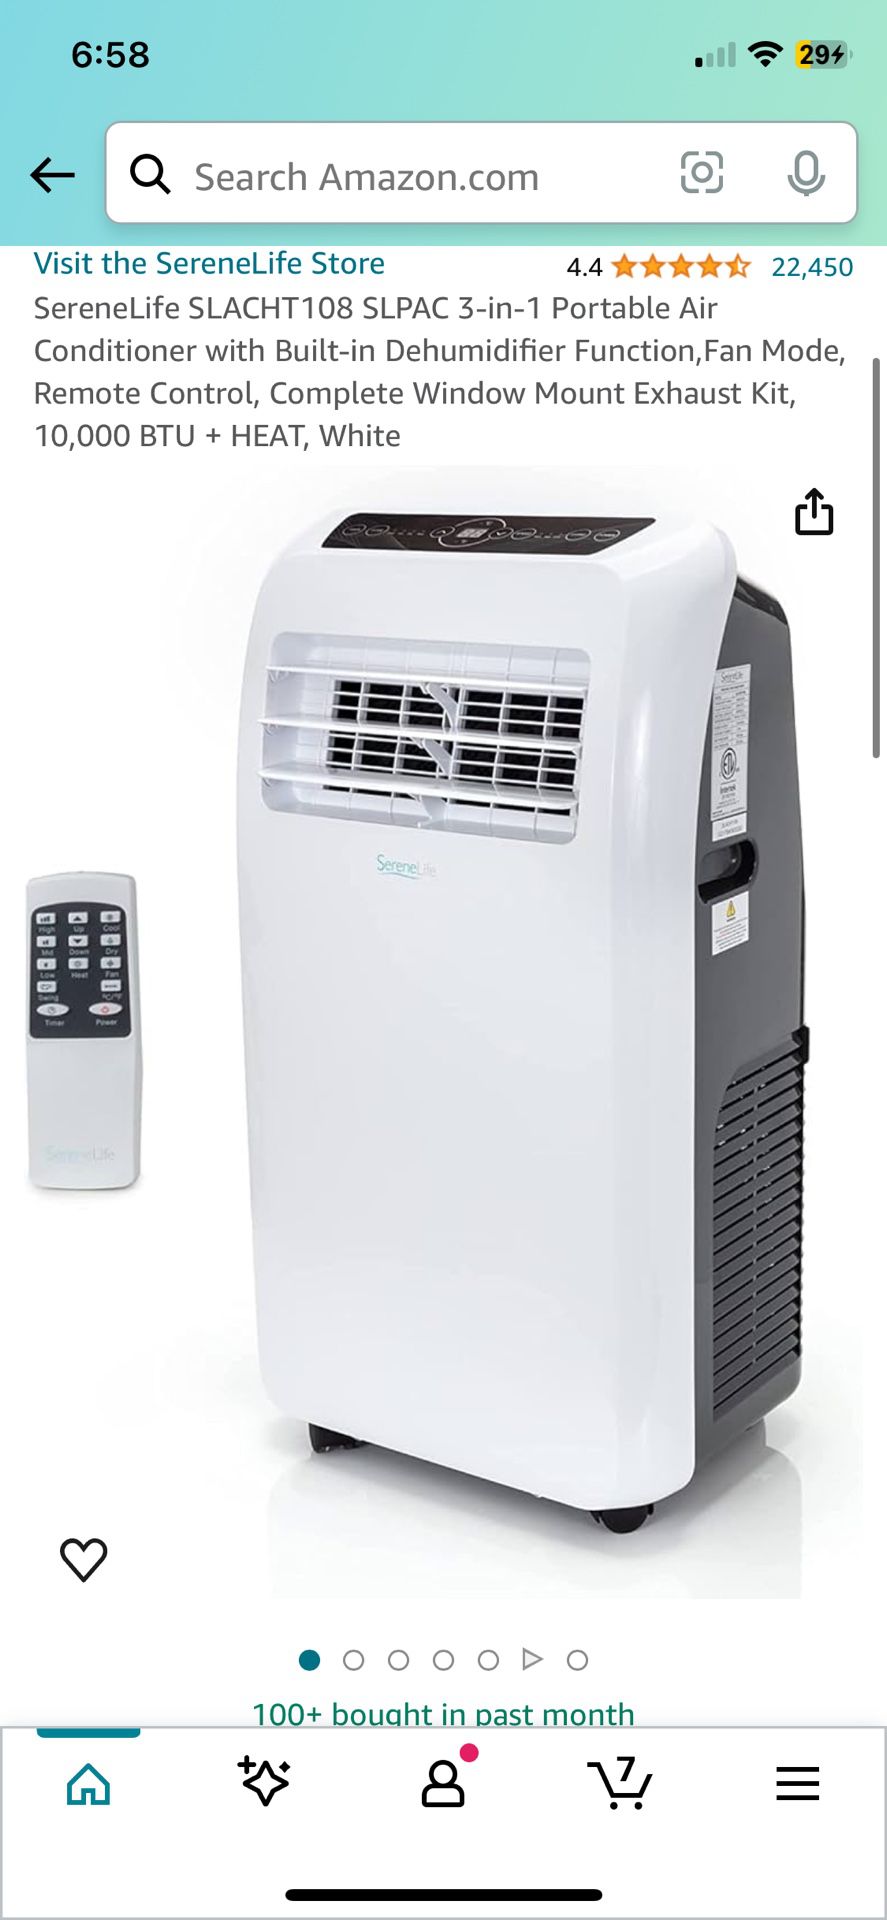 SereneLife SLACHT108 SLPAC 3-in-1 Portable Air Conditioner with Built-in Dehumidifier Function,Fan Mode, Remote Control, Complete Window Mount Exhaust